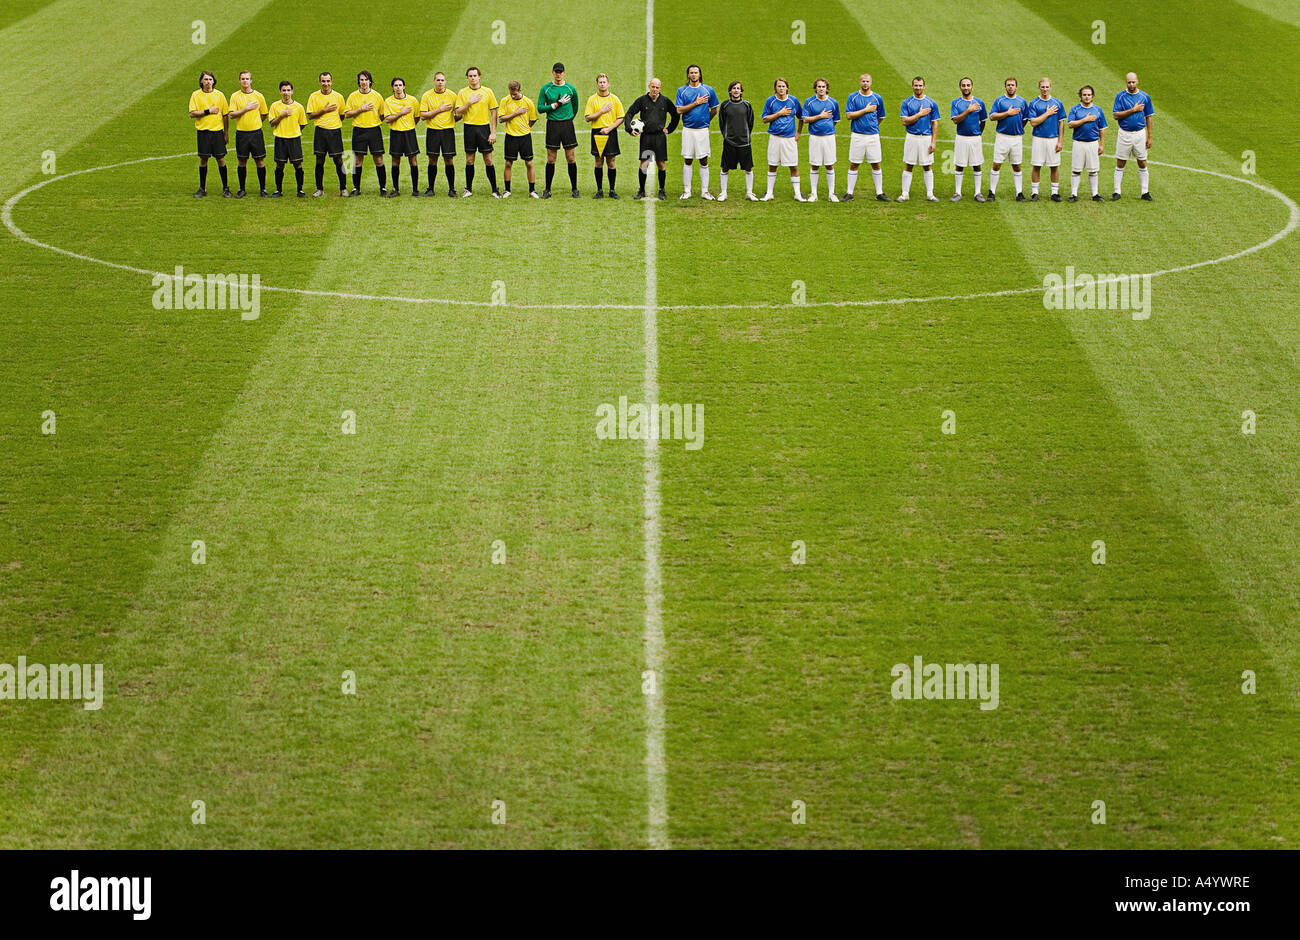 Football teams on the pitch Stock Photo